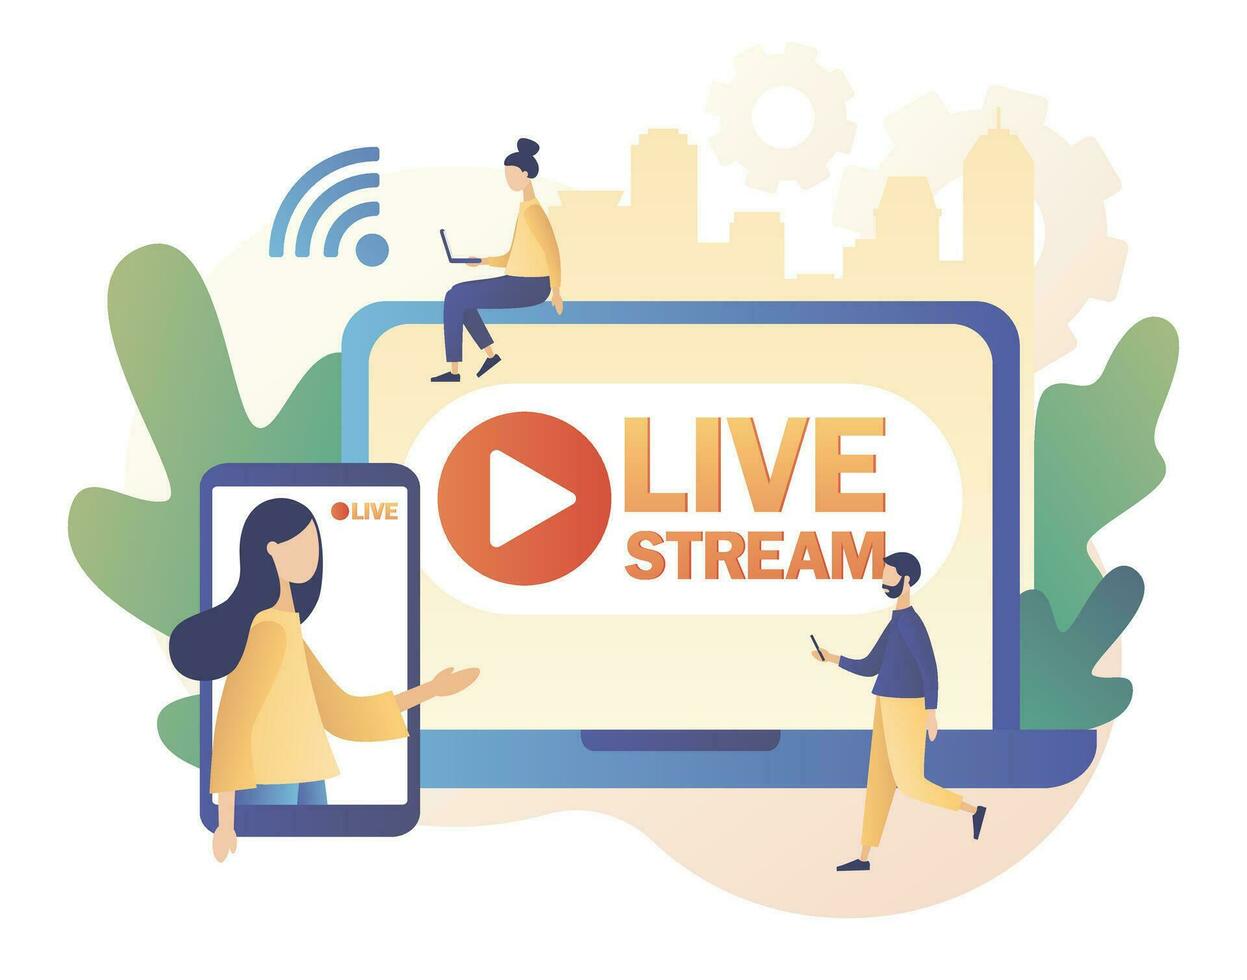 Live streaming. Online video chat. Tiny people that conduct and watch live stream in social networks. Modern flat cartoon style. Vector illustration on white background